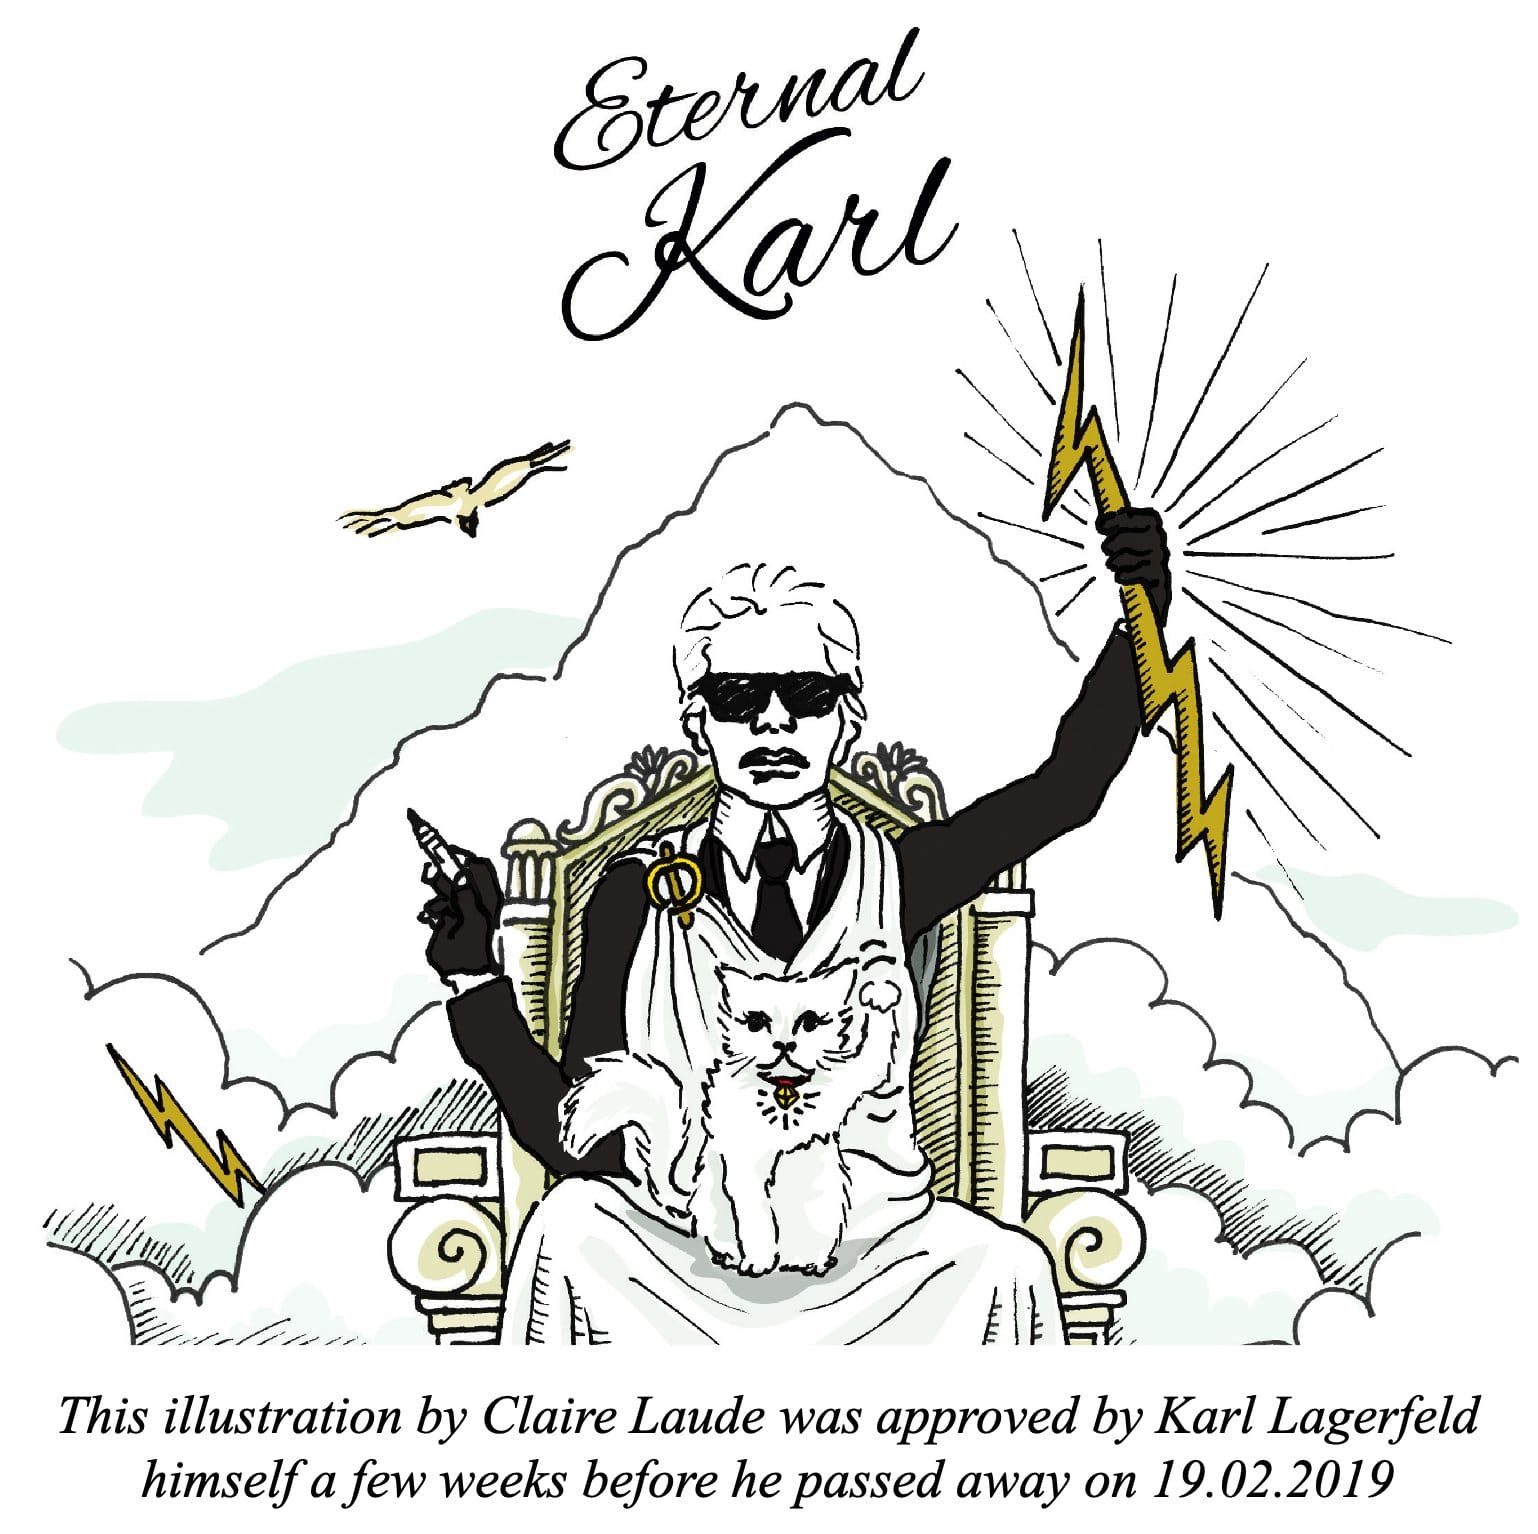 Chanel acquires Karl Lagerfeld’s Parisian bookstore to preserve the Kaiser’s legacy 